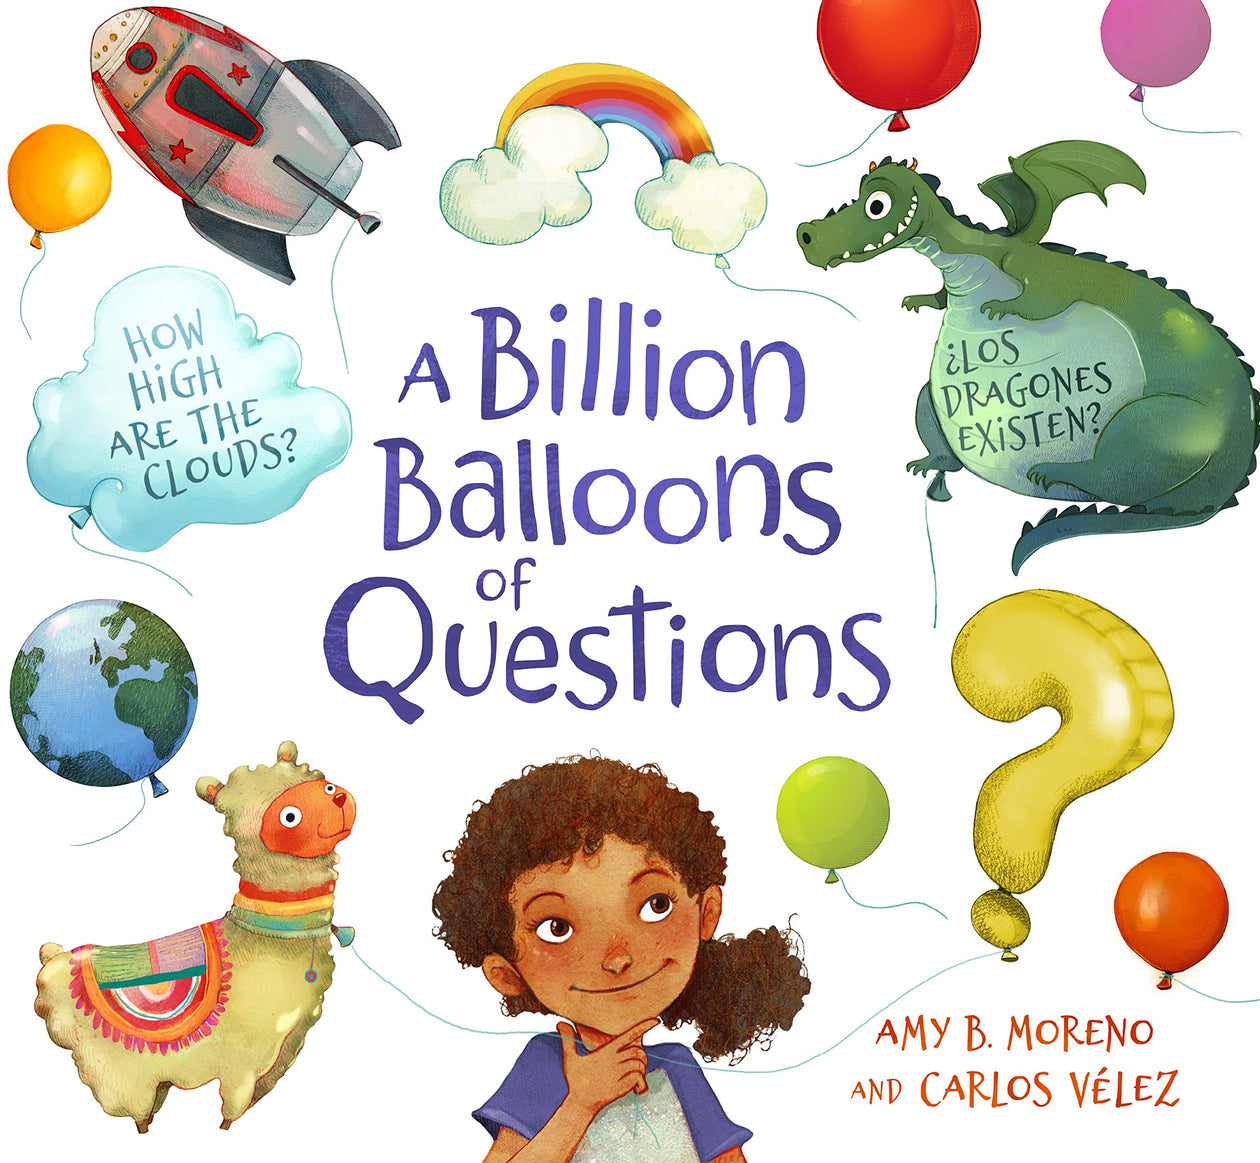 Amy B. Moreno: A Billion Balloons of Questions, illustrated by Carlos Velez